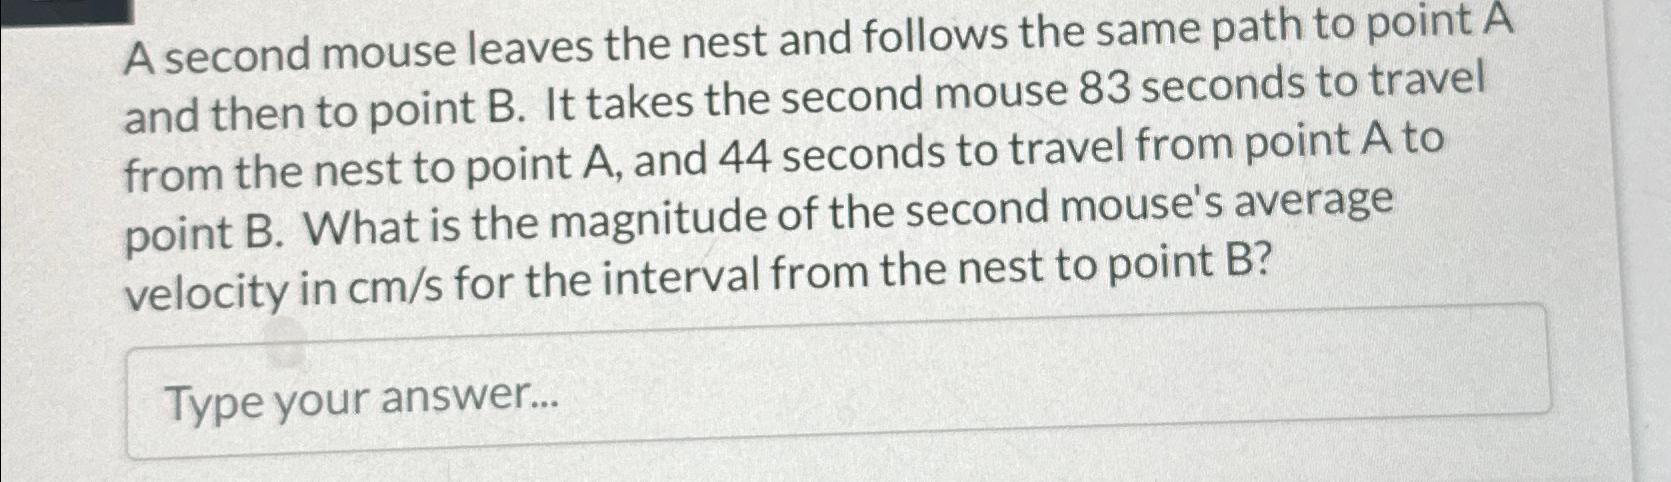 A second mouse leaves the nest and follows the same path to point A and then to point B. It takes the second